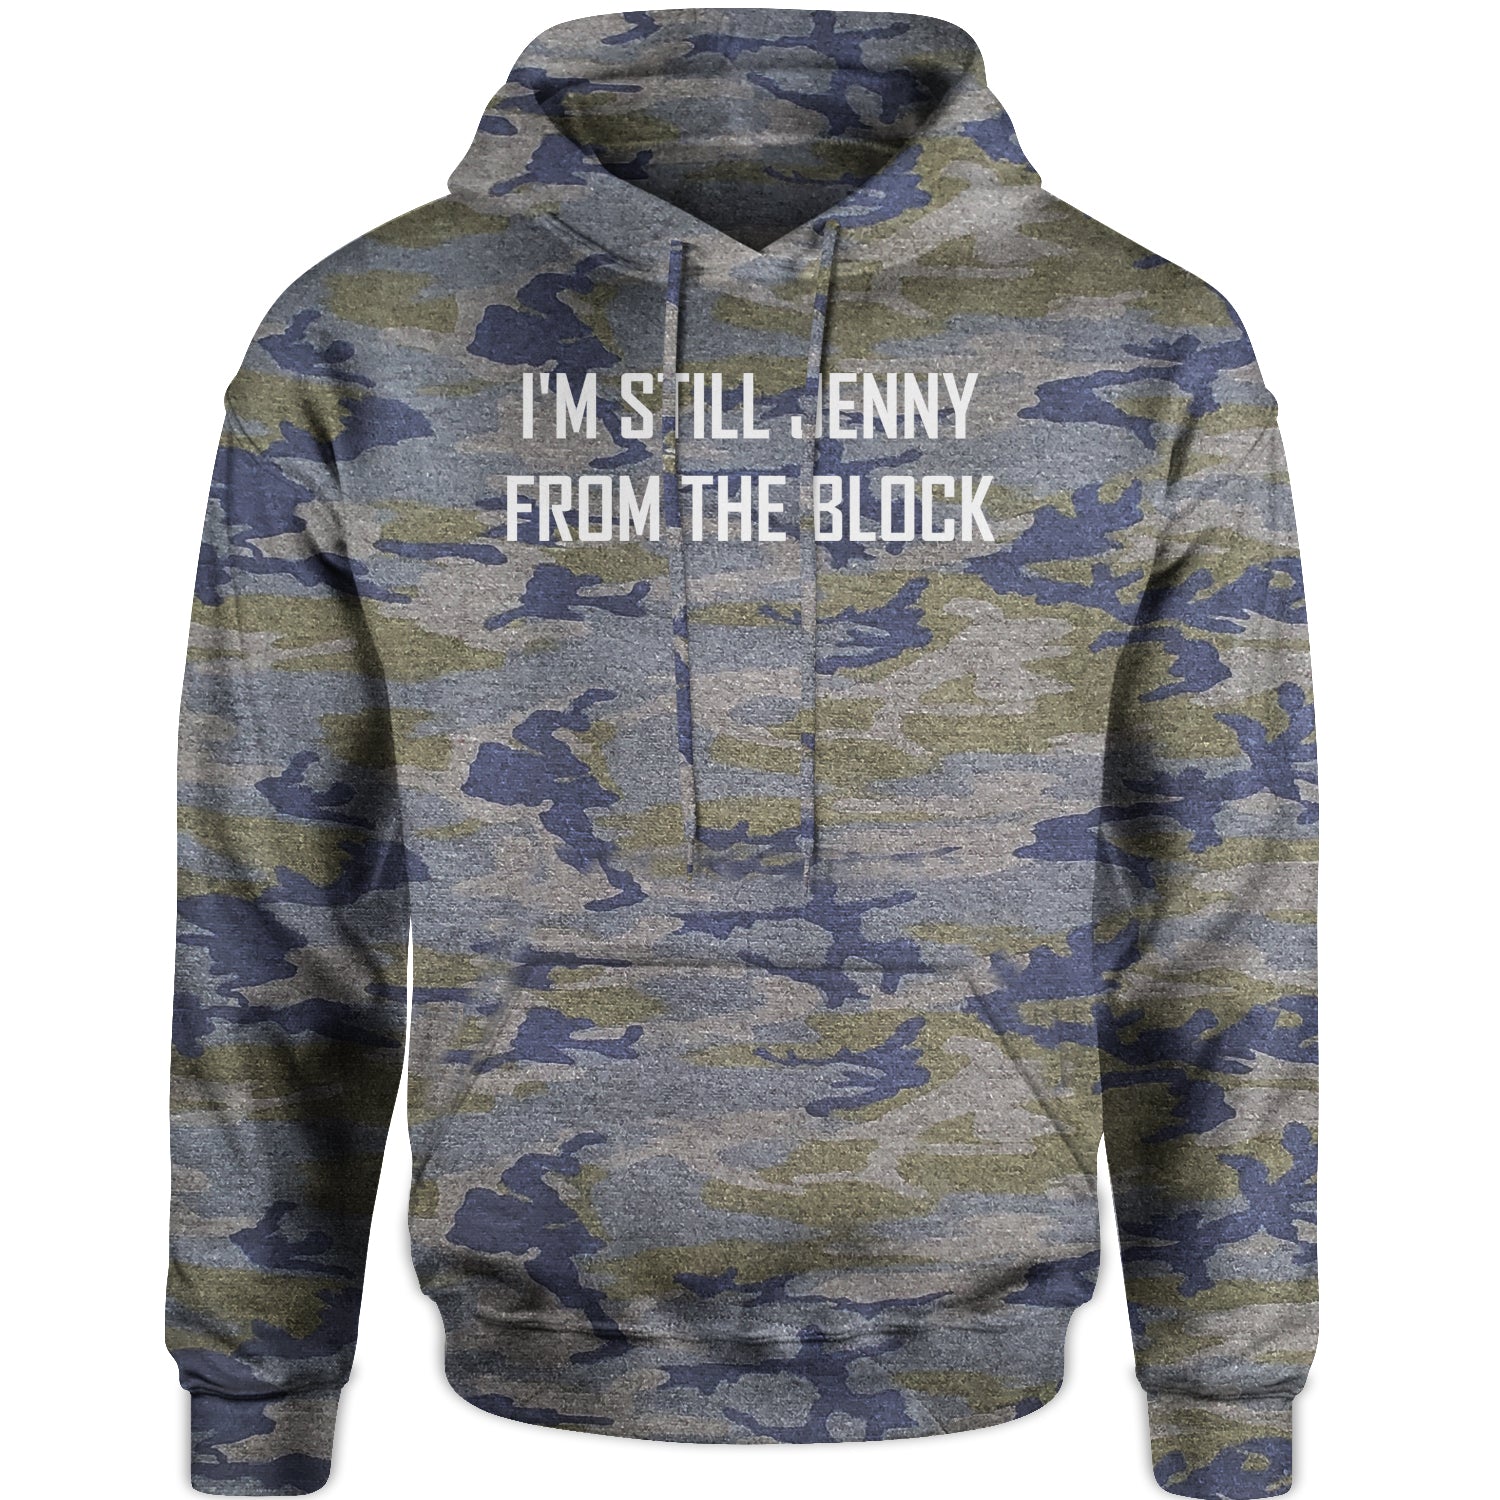 I'm Still Jenny From The Block Adult Hoodie Sweatshirt concert, jennifer, lopez, merch, tour by Expression Tees